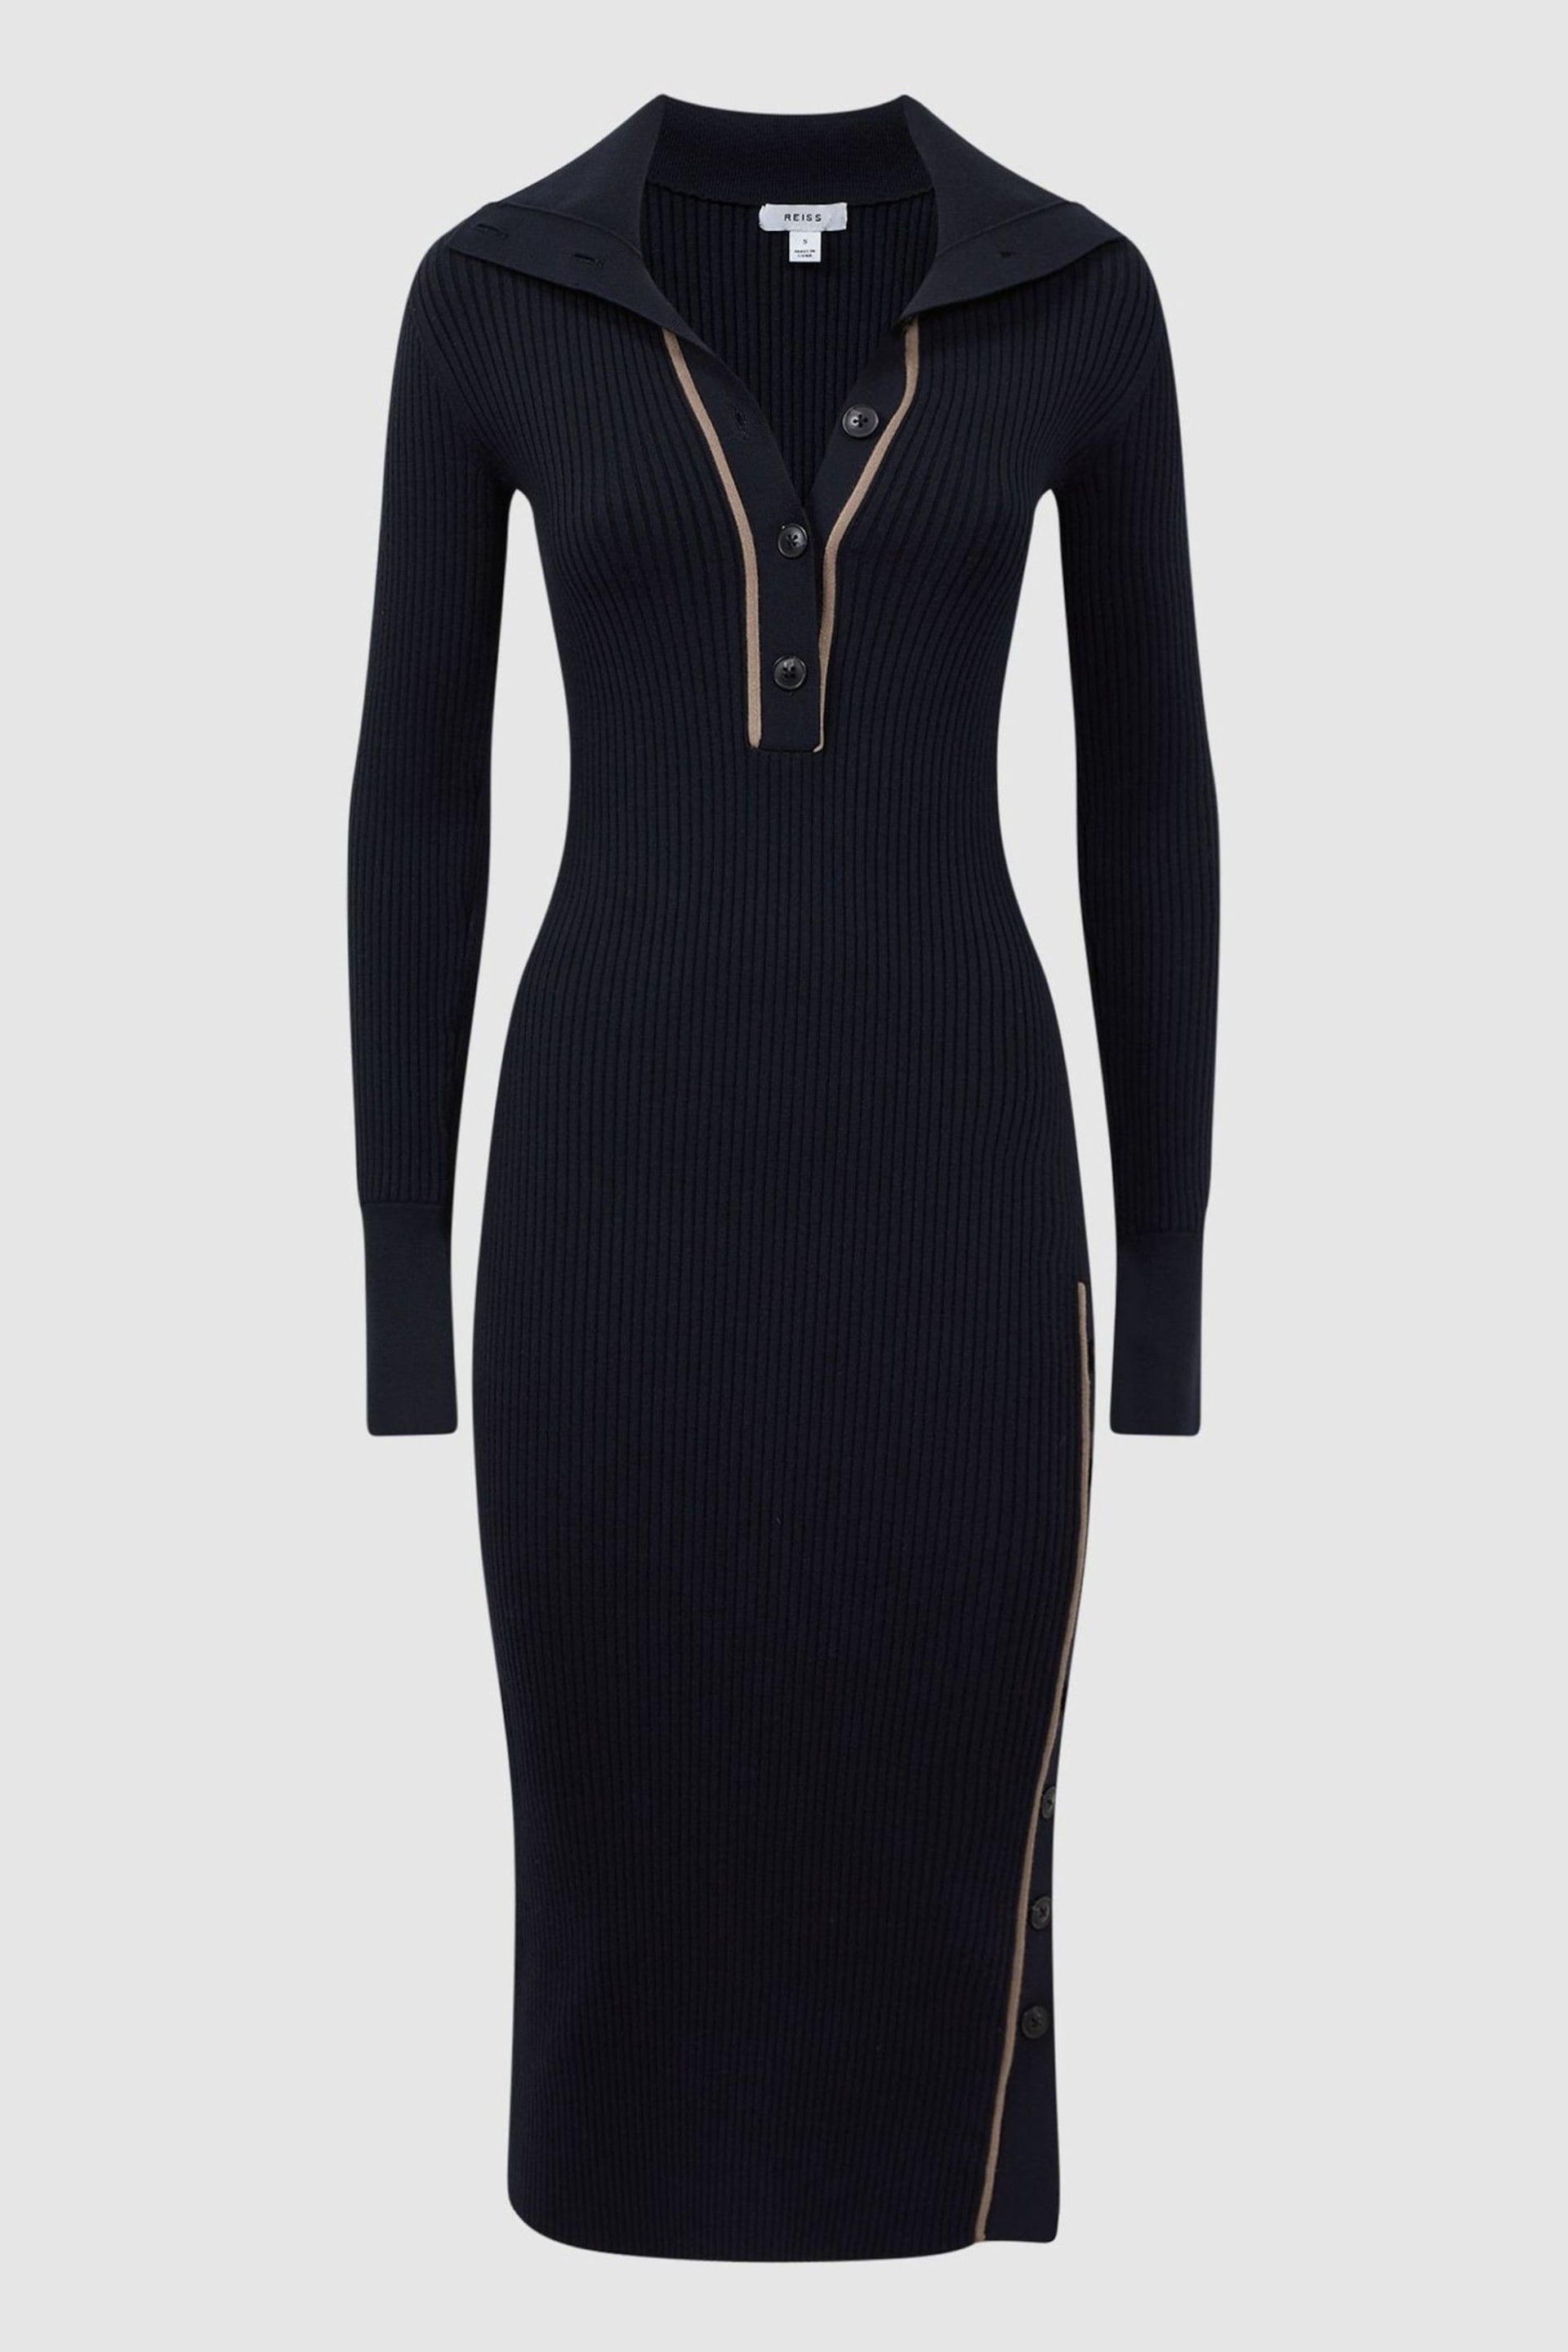 Reiss Navy/Camel Michelle Petite Bodycon Knitted Colourblock Midi Dress - Image 2 of 5